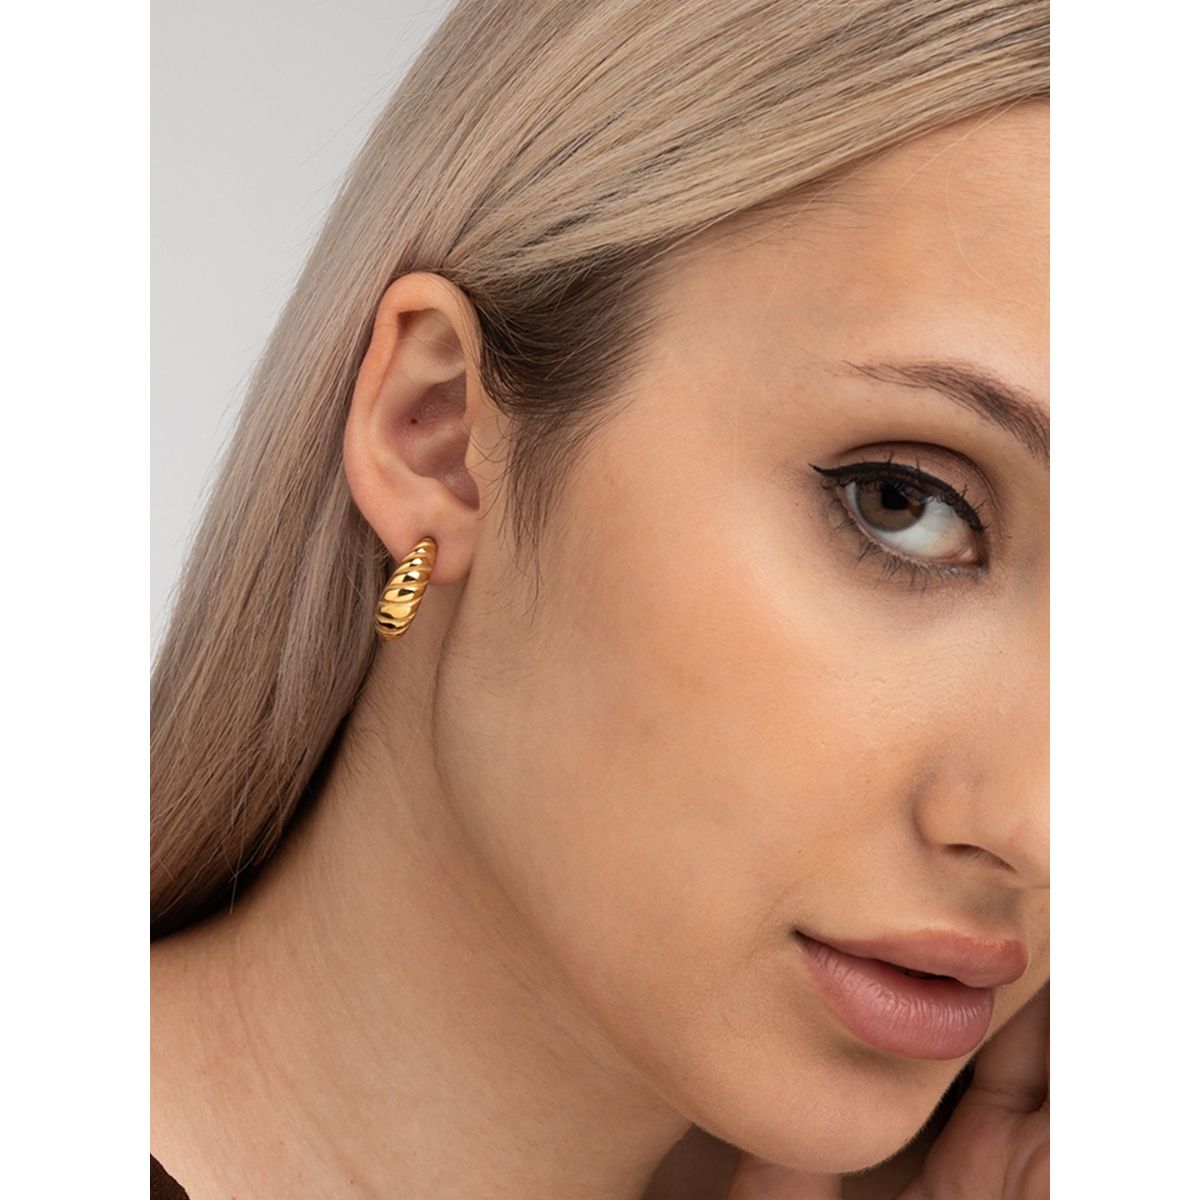 Discover 86+ 18k gold earrings online india best